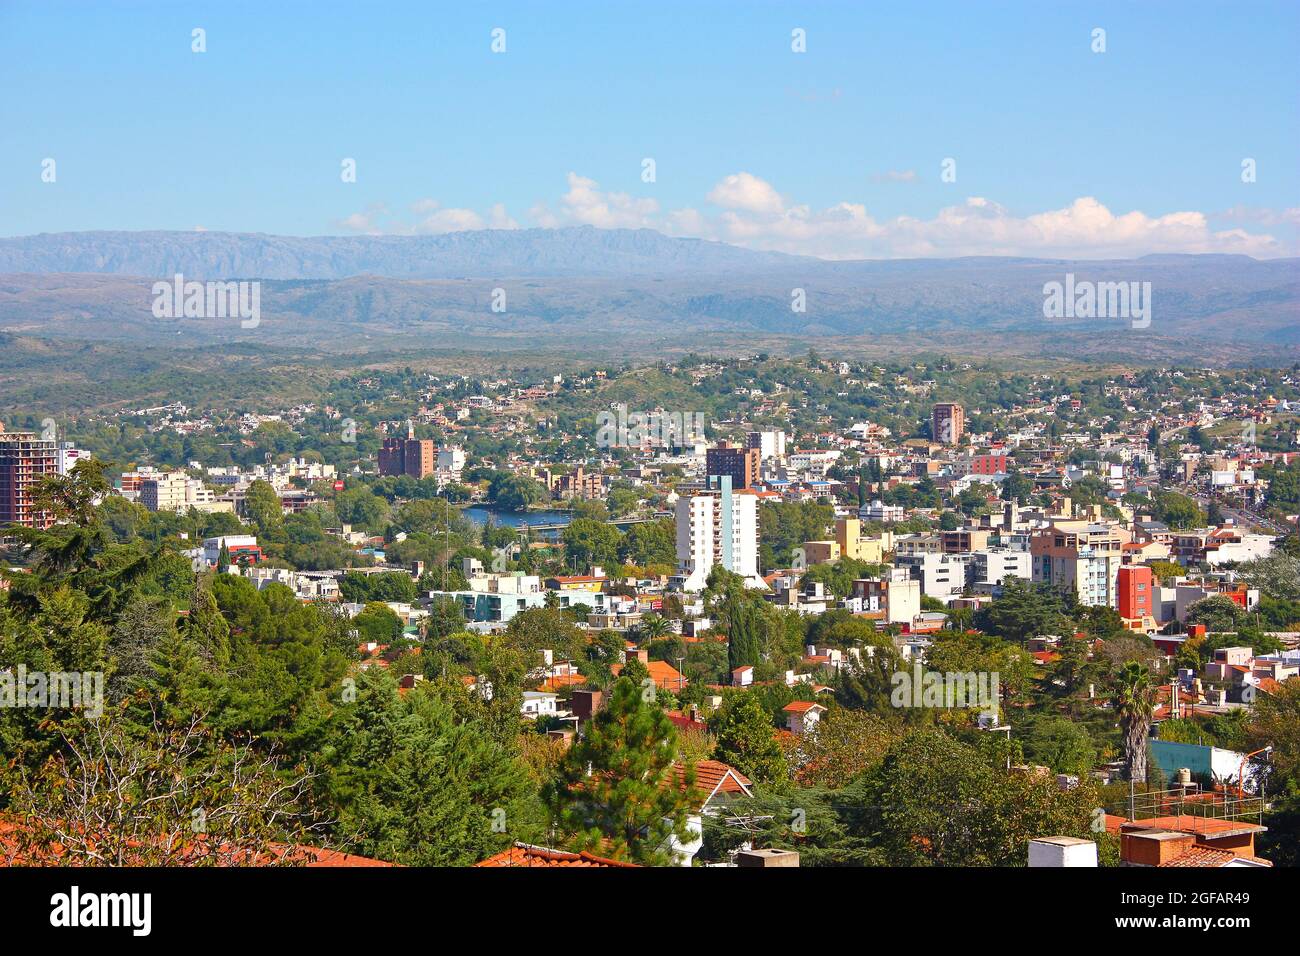 VILLA CARLOS PAZ, CORDOBA, ARGENTINA.Panoramic view from the top of a hill of the landscape of Carlos Paz Town in a sunny day. Stock Photo